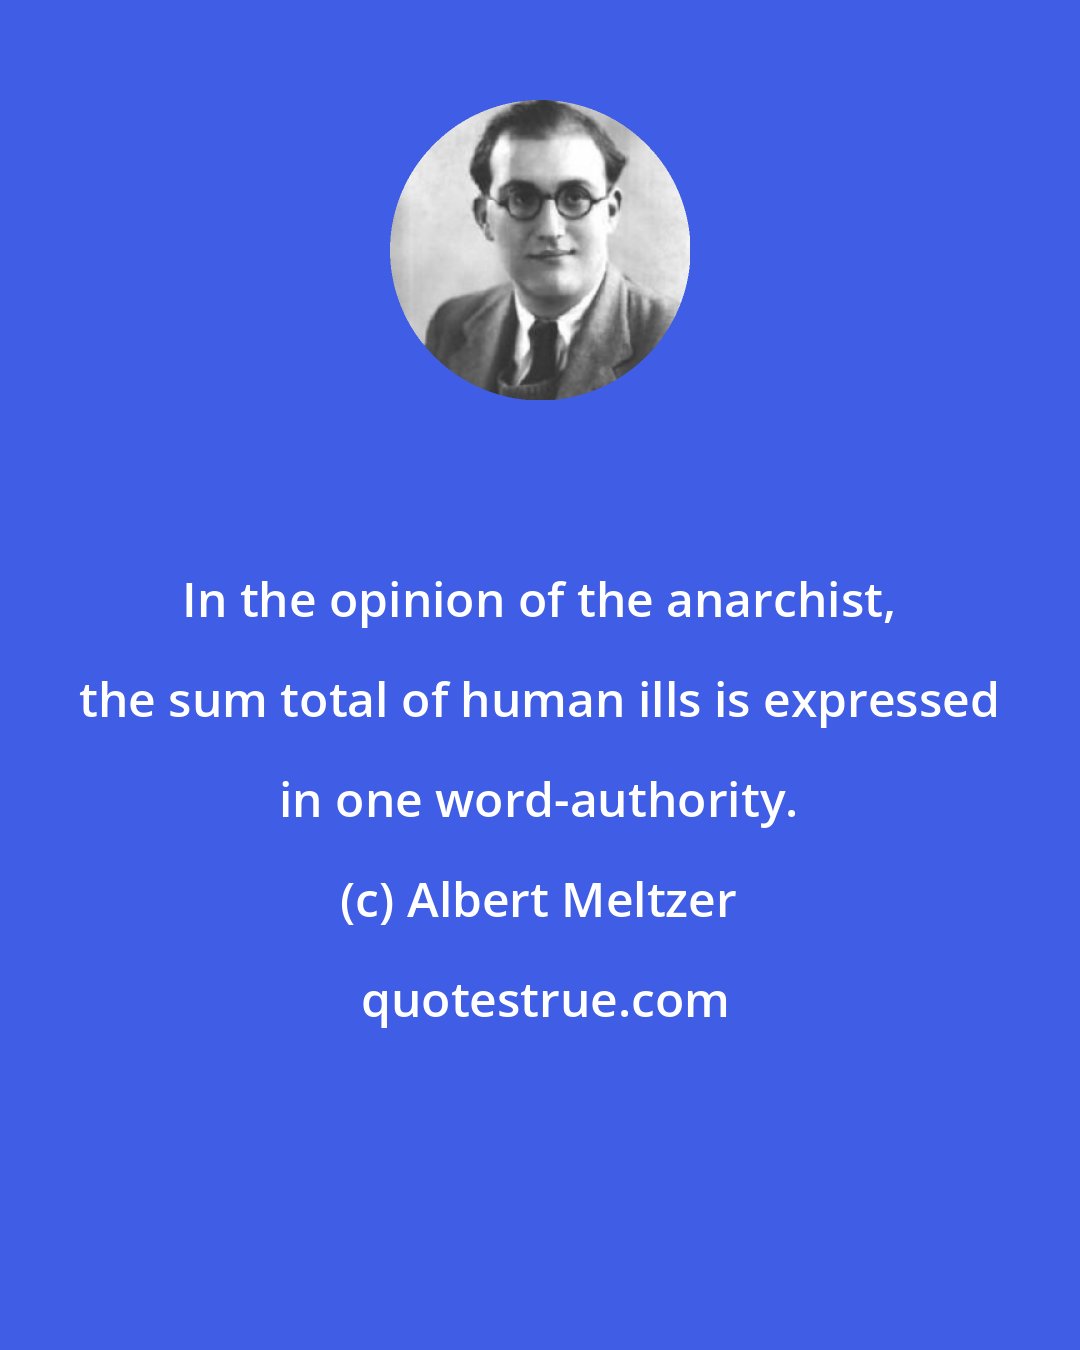 Albert Meltzer: In the opinion of the anarchist, the sum total of human ills is expressed in one word-authority.